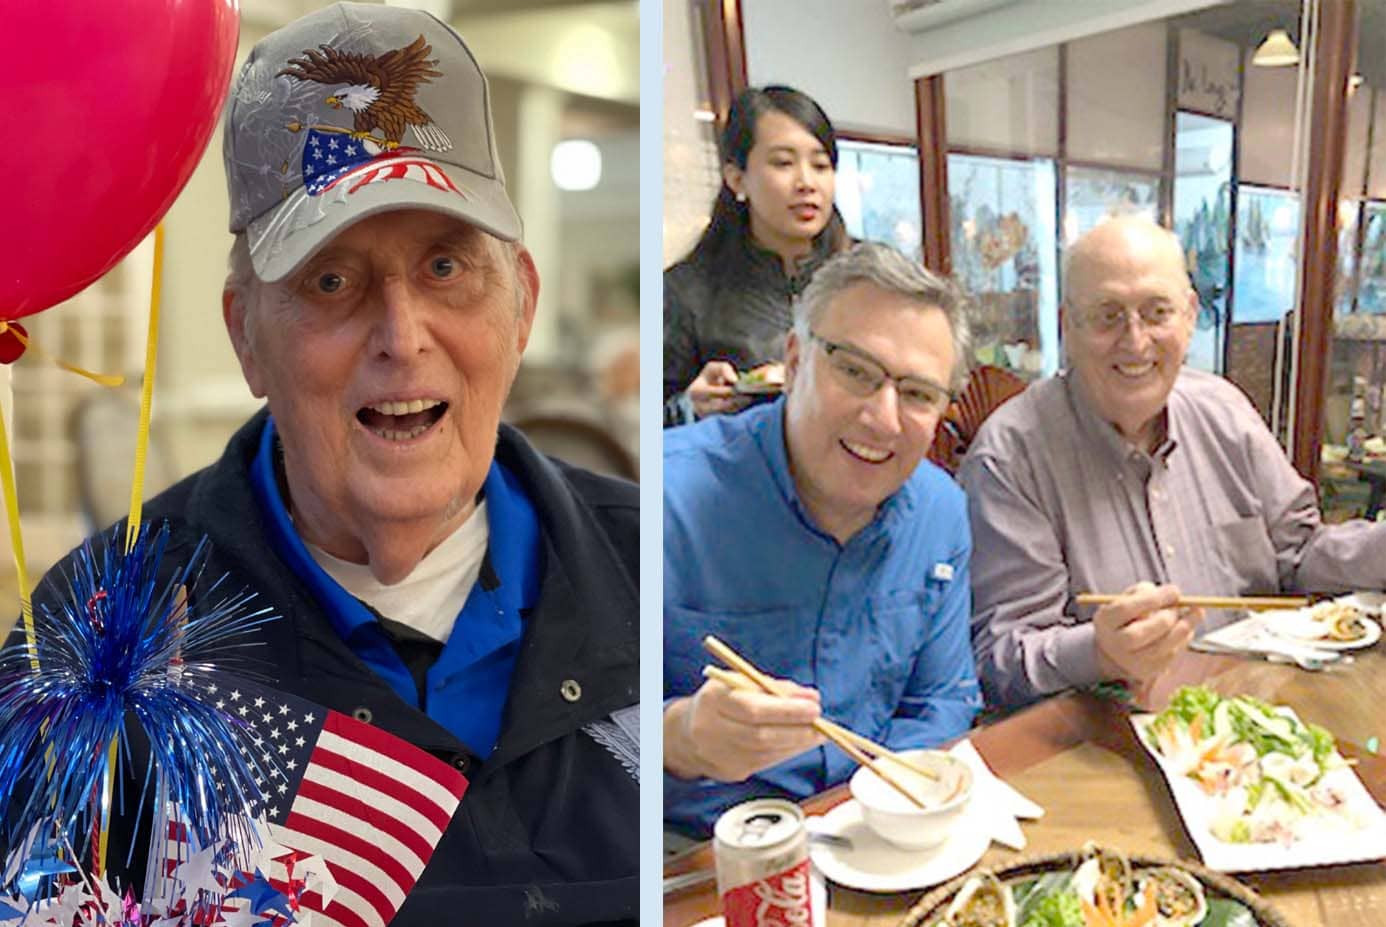 Two Photos: One of Bill Gauntt Smiling with the a small flag and balloon, another photo of Mr. Gauntt and Greg Vital in Vietnam in a restaurant